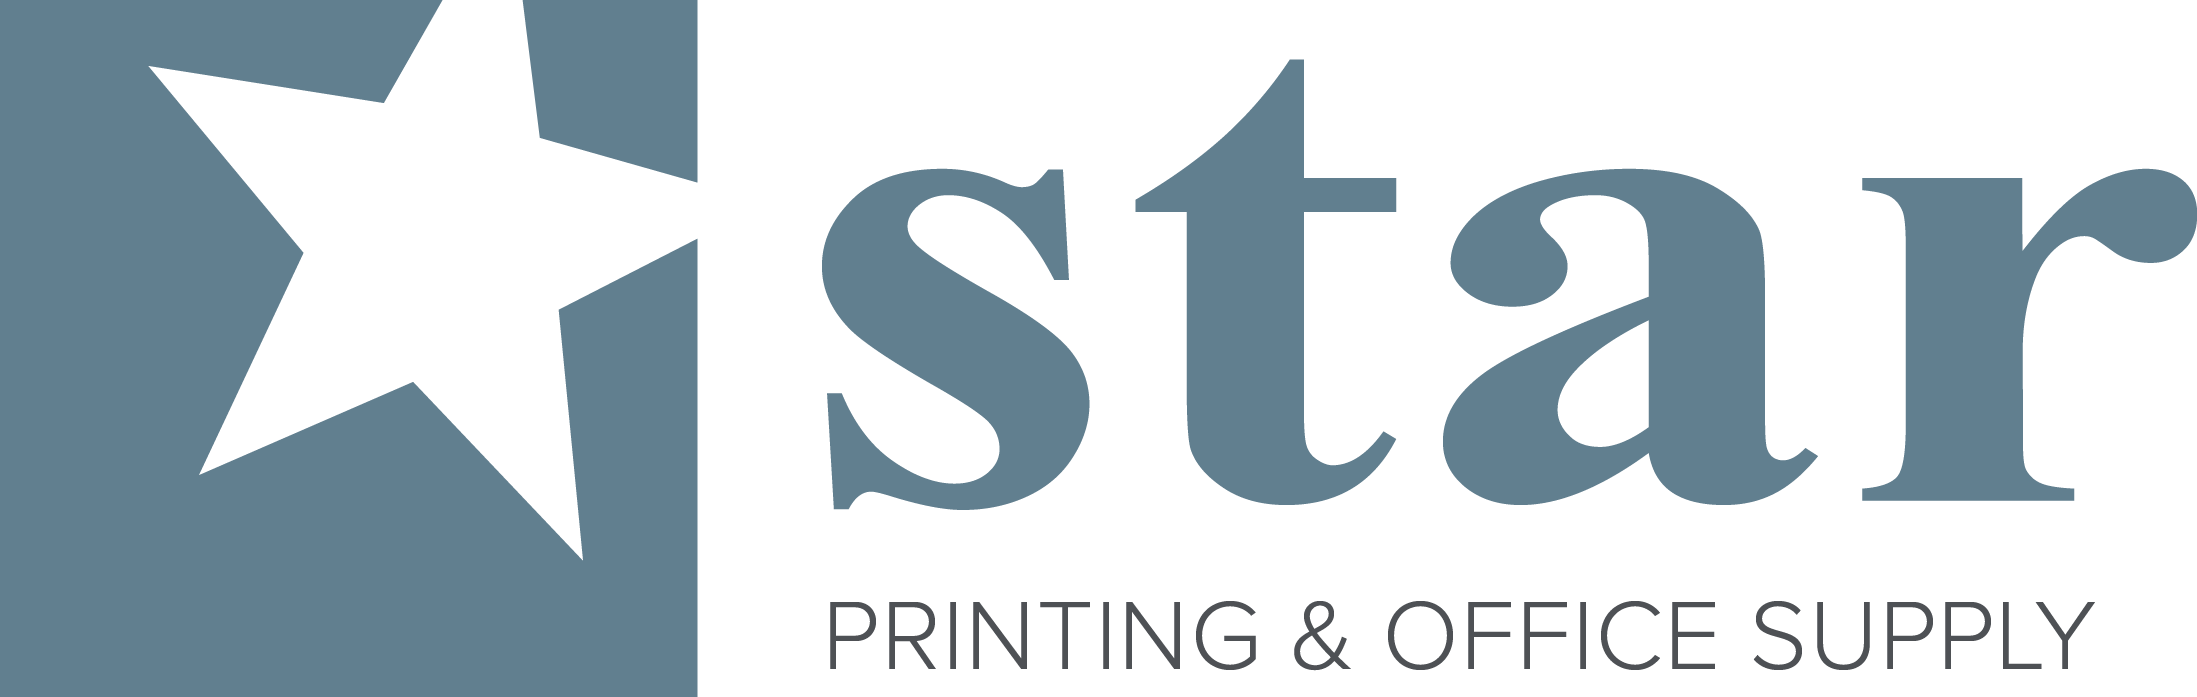 Star Graphic Supplies - Offset and Digital Printing Supplies, Pressroom  Products, Inks & Chemicals